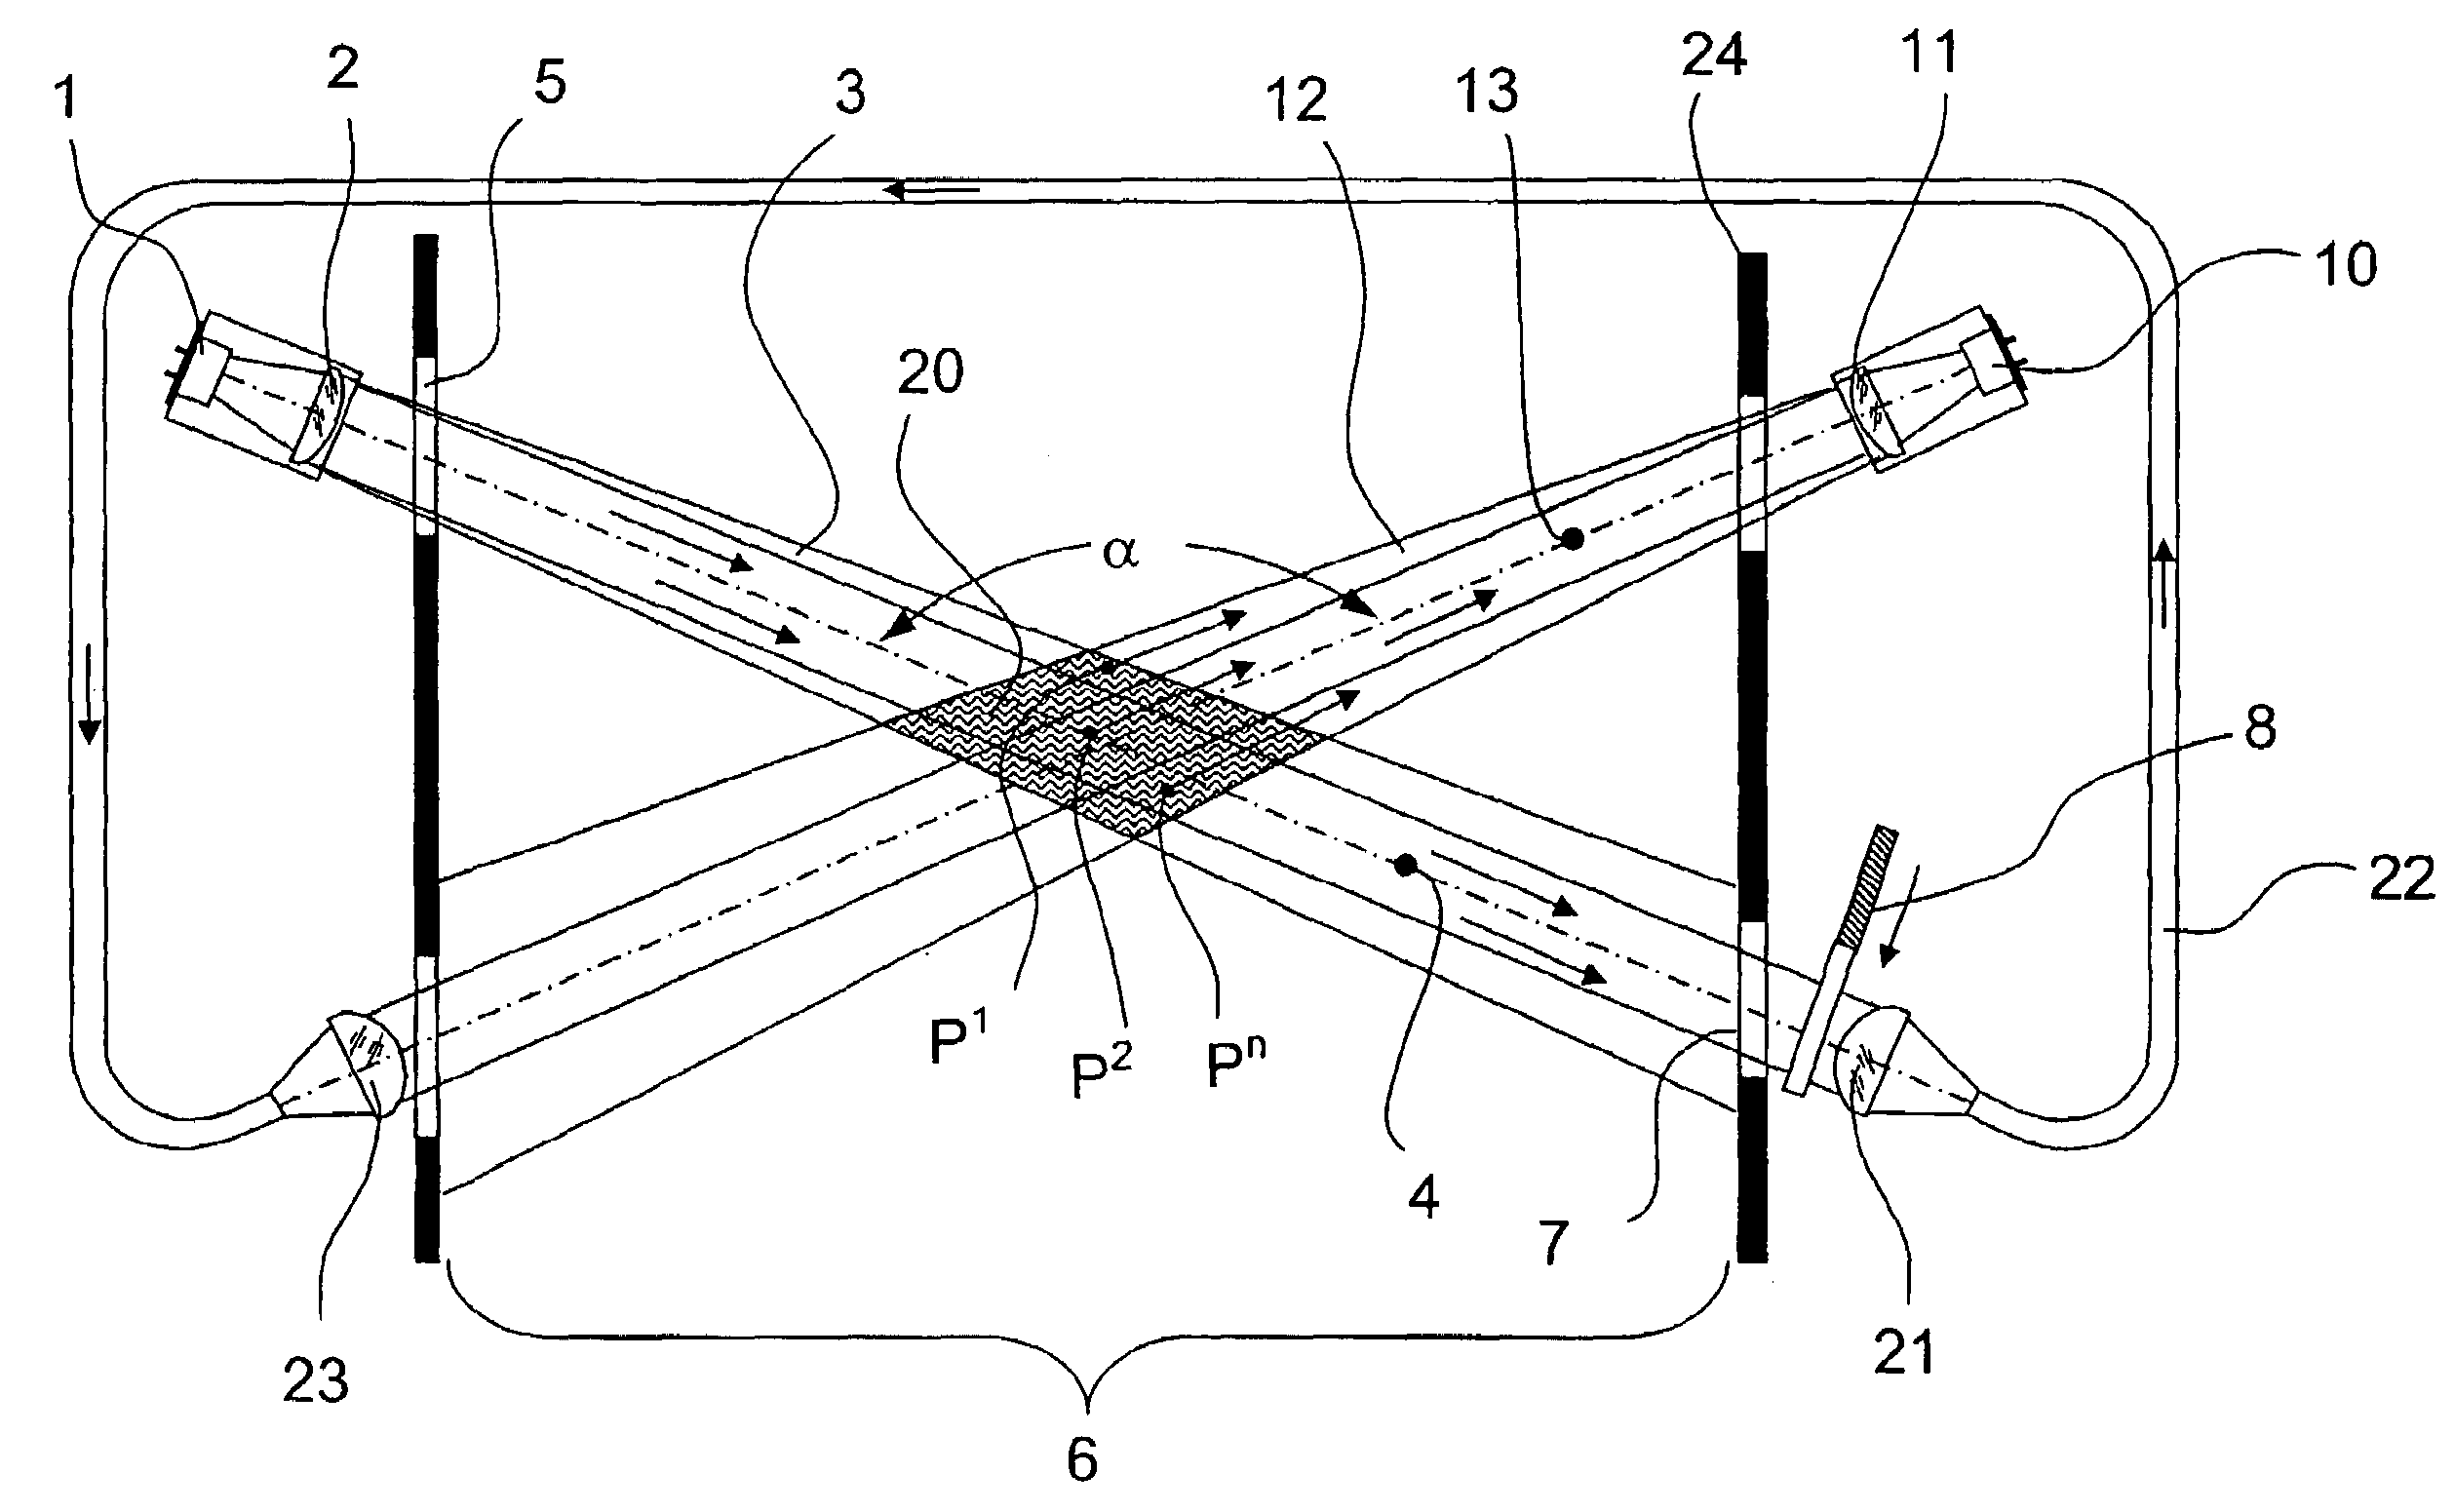 Scattered light range of view measurement apparatus